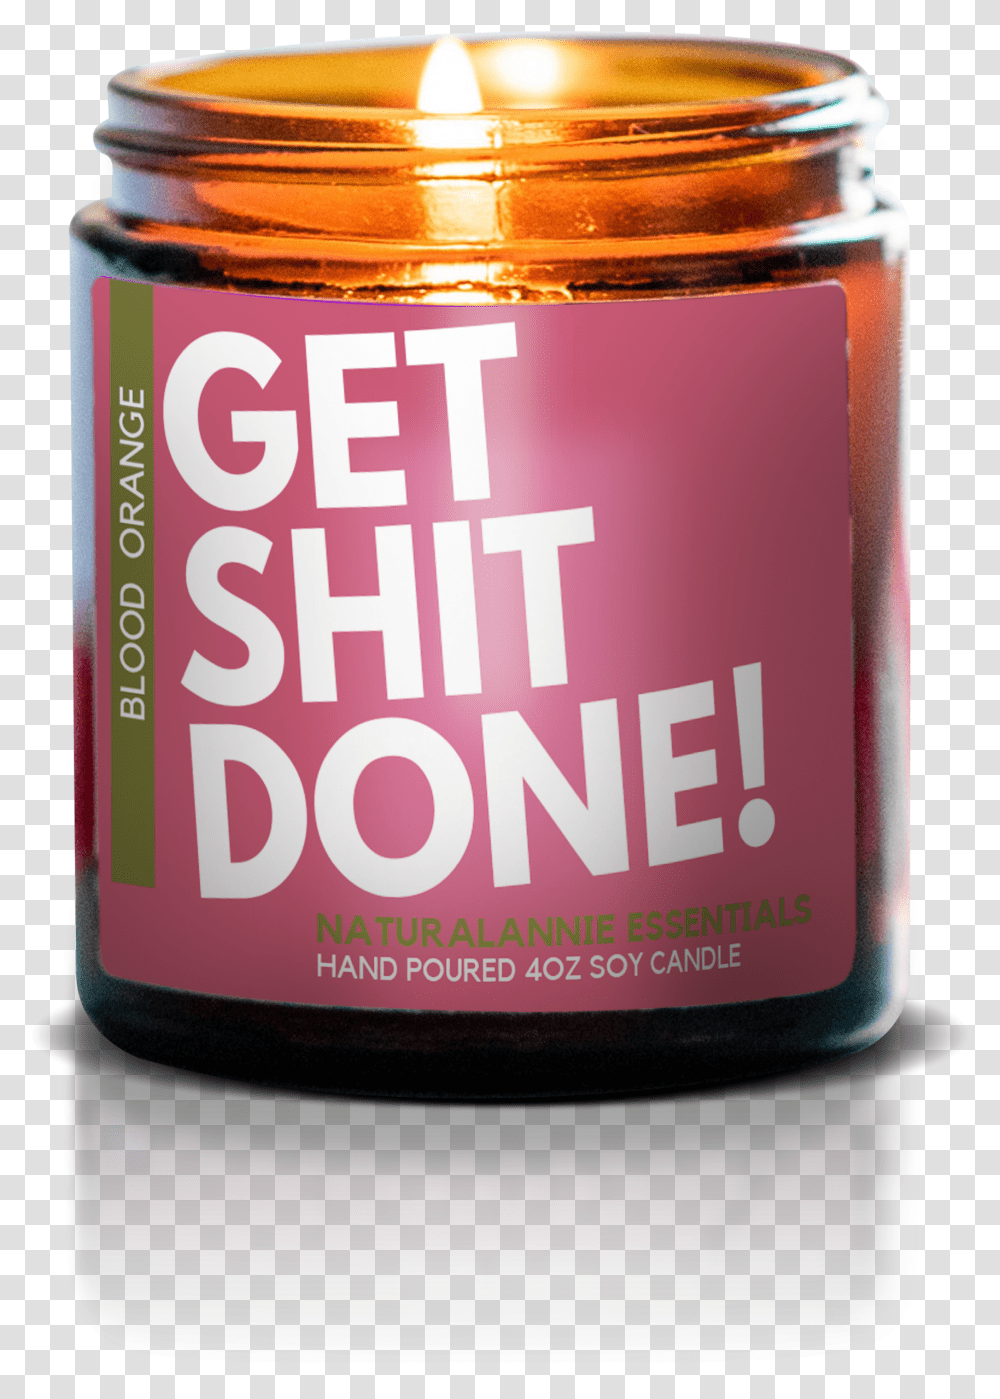 Get Shit Done Blood Orange Scented Soy Candle Naturalannie Blood Orange Candle, Bottle, Beverage, Drink, Alcohol Transparent Png